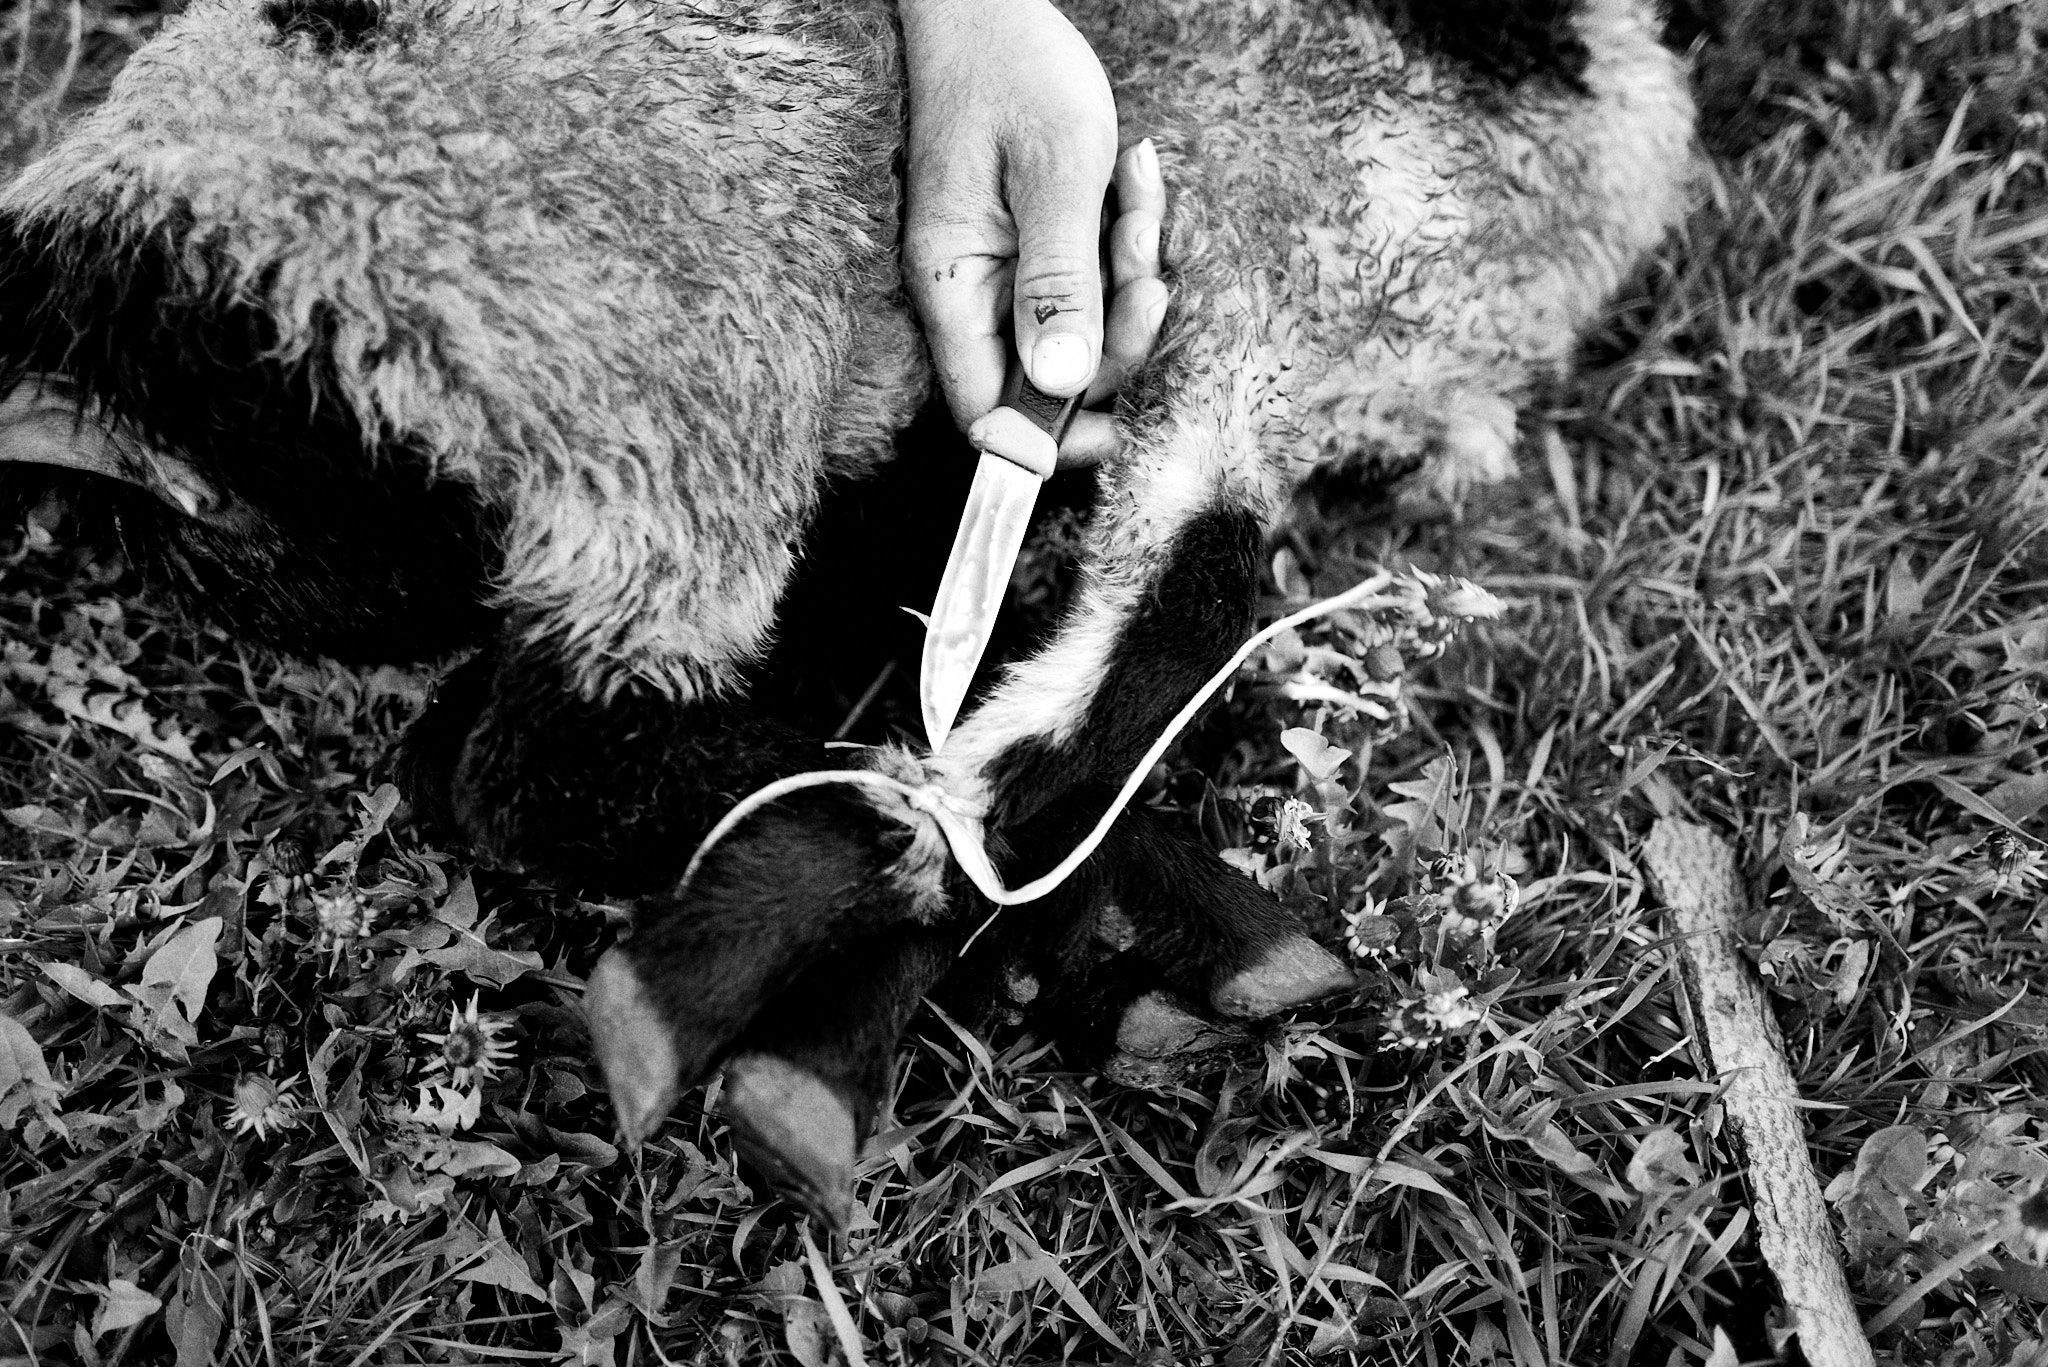 A moment after the lamb sacrifice, ties not necessary anymore, Yarlovo, Bulgaria 2021 © Asen Velichkov